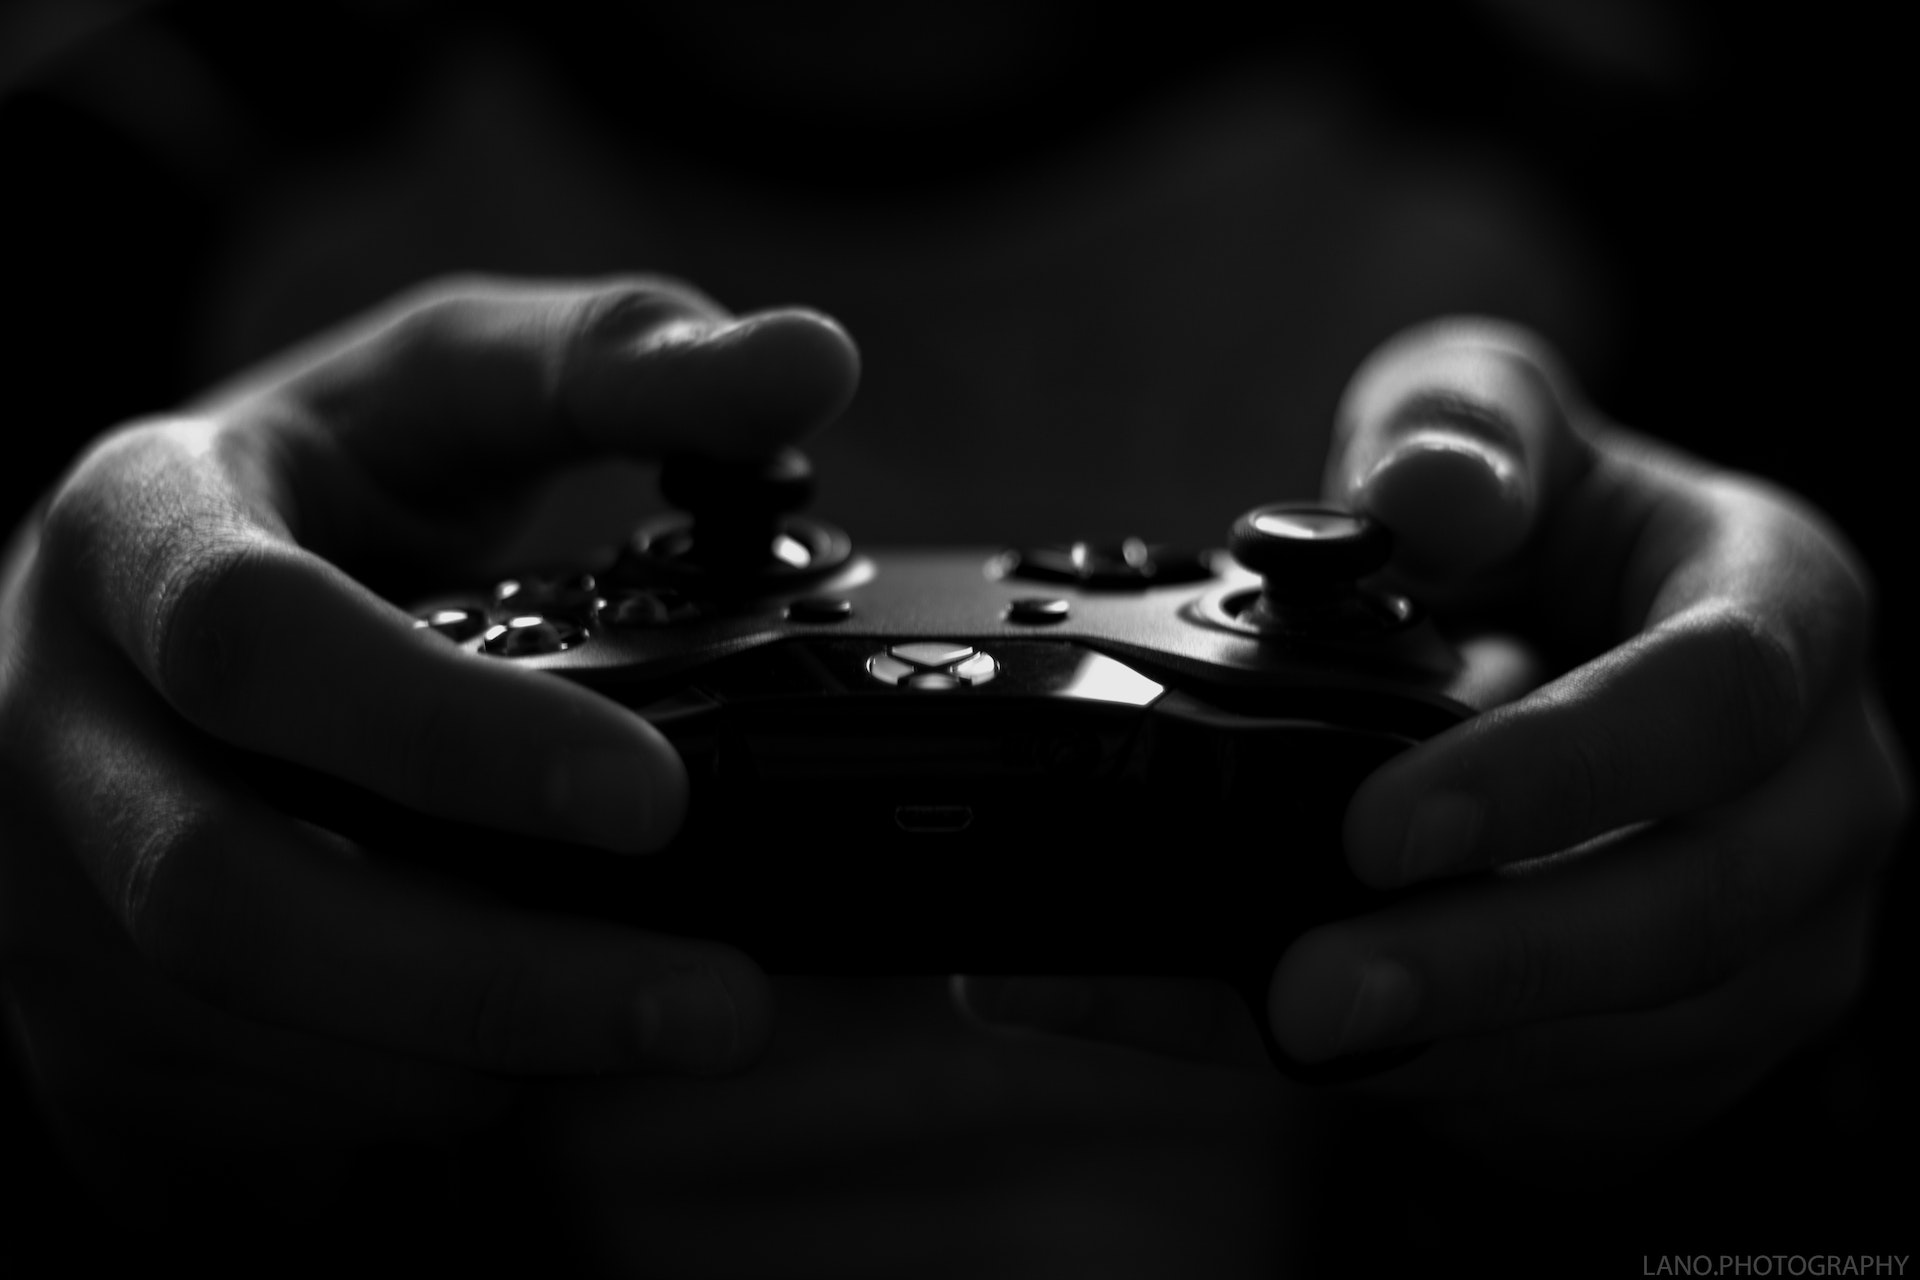 Black and white close-up of hands holding Xbox controller.